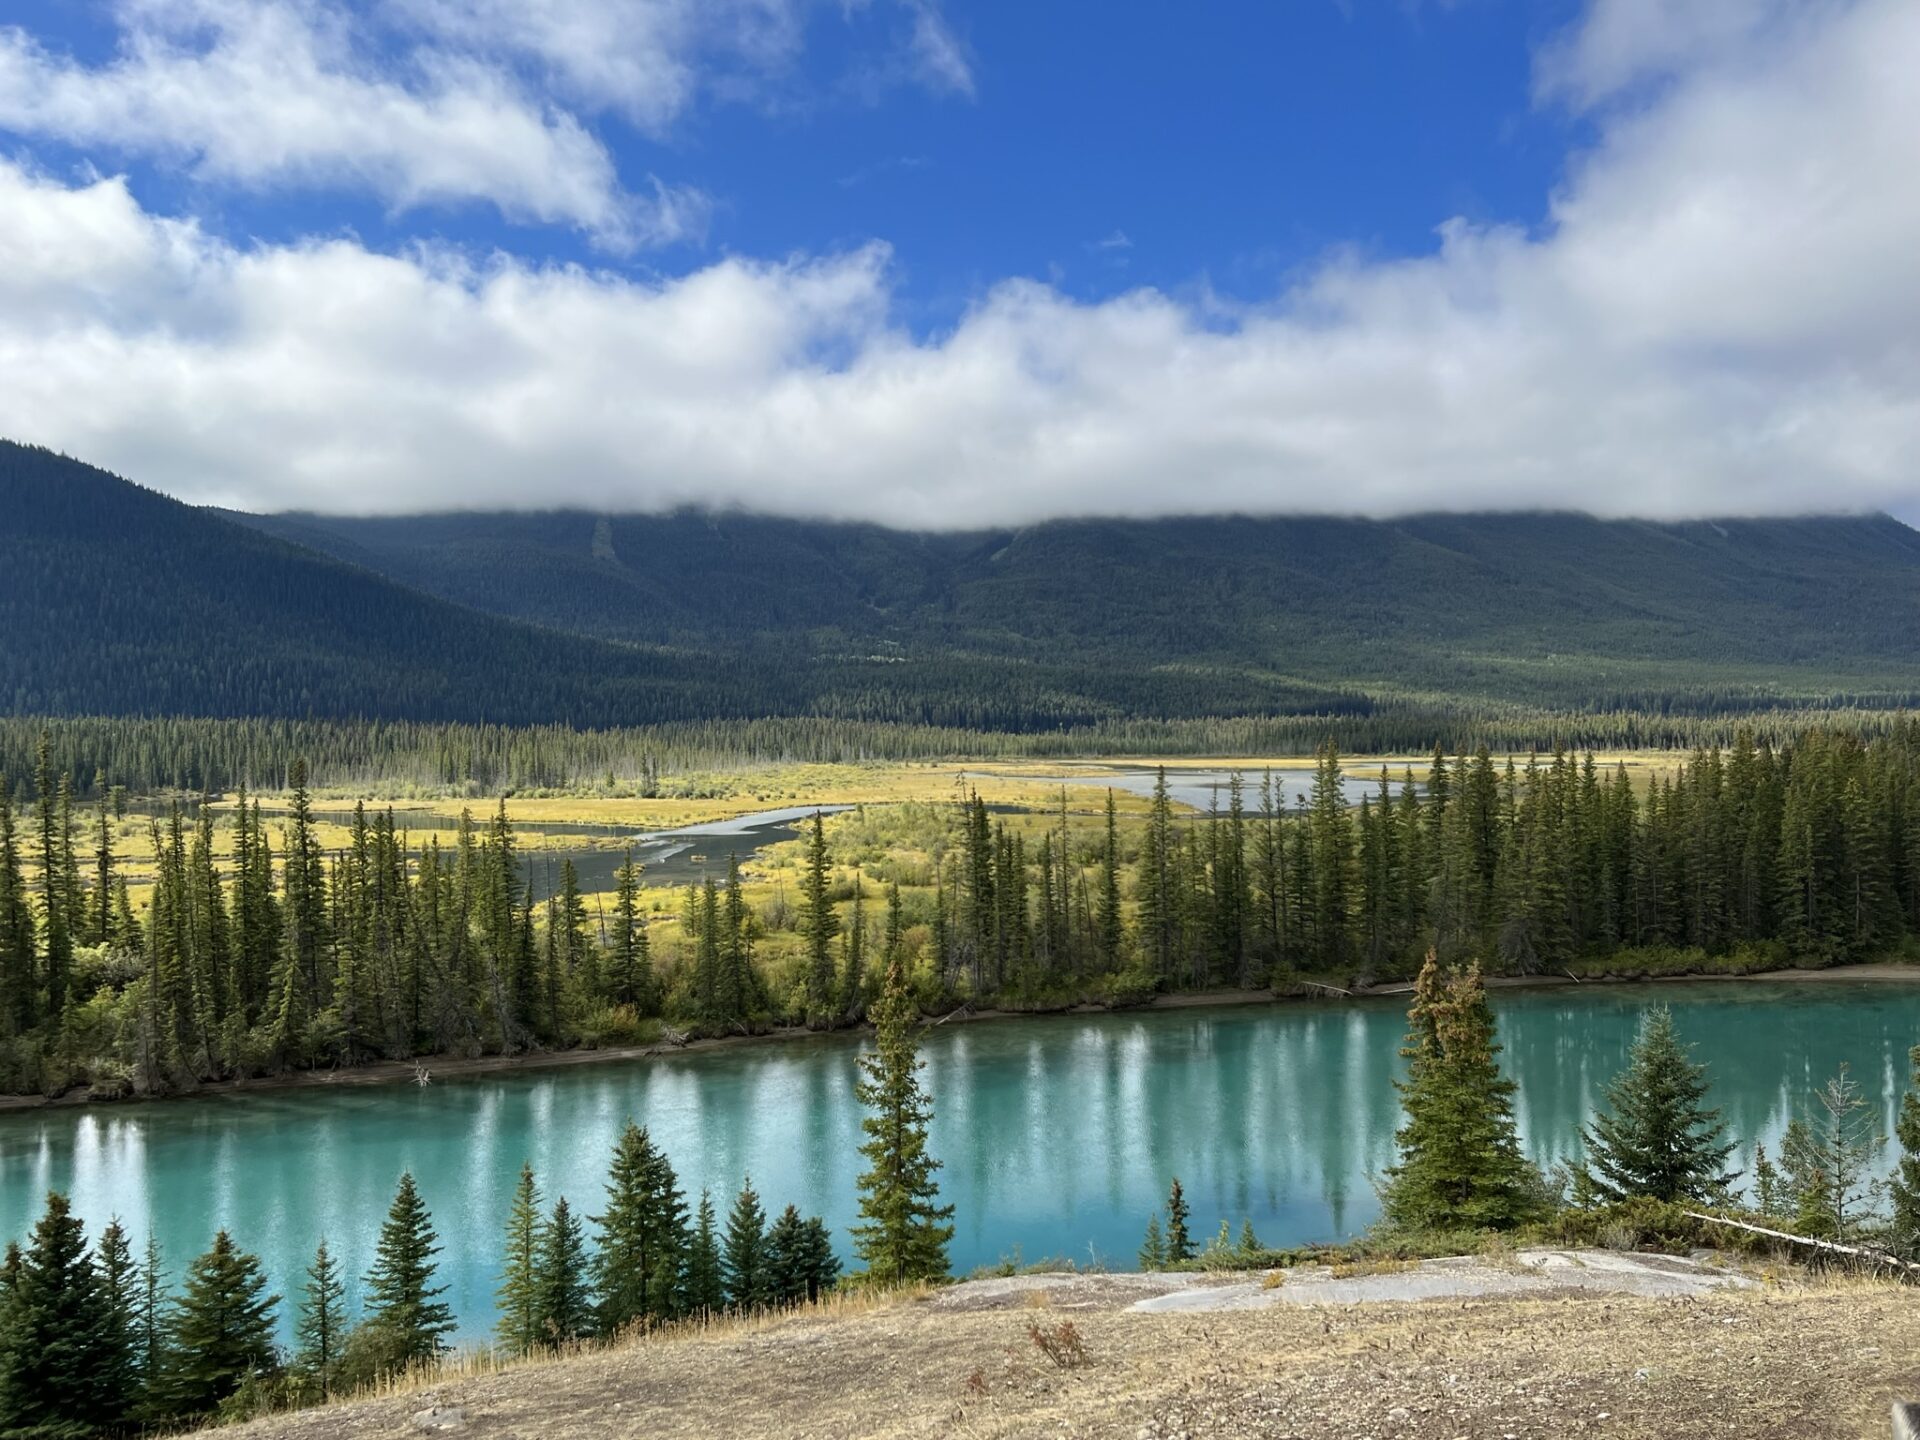 10 Unmissable Road Trip Stops in Canada's Rocky Mountains